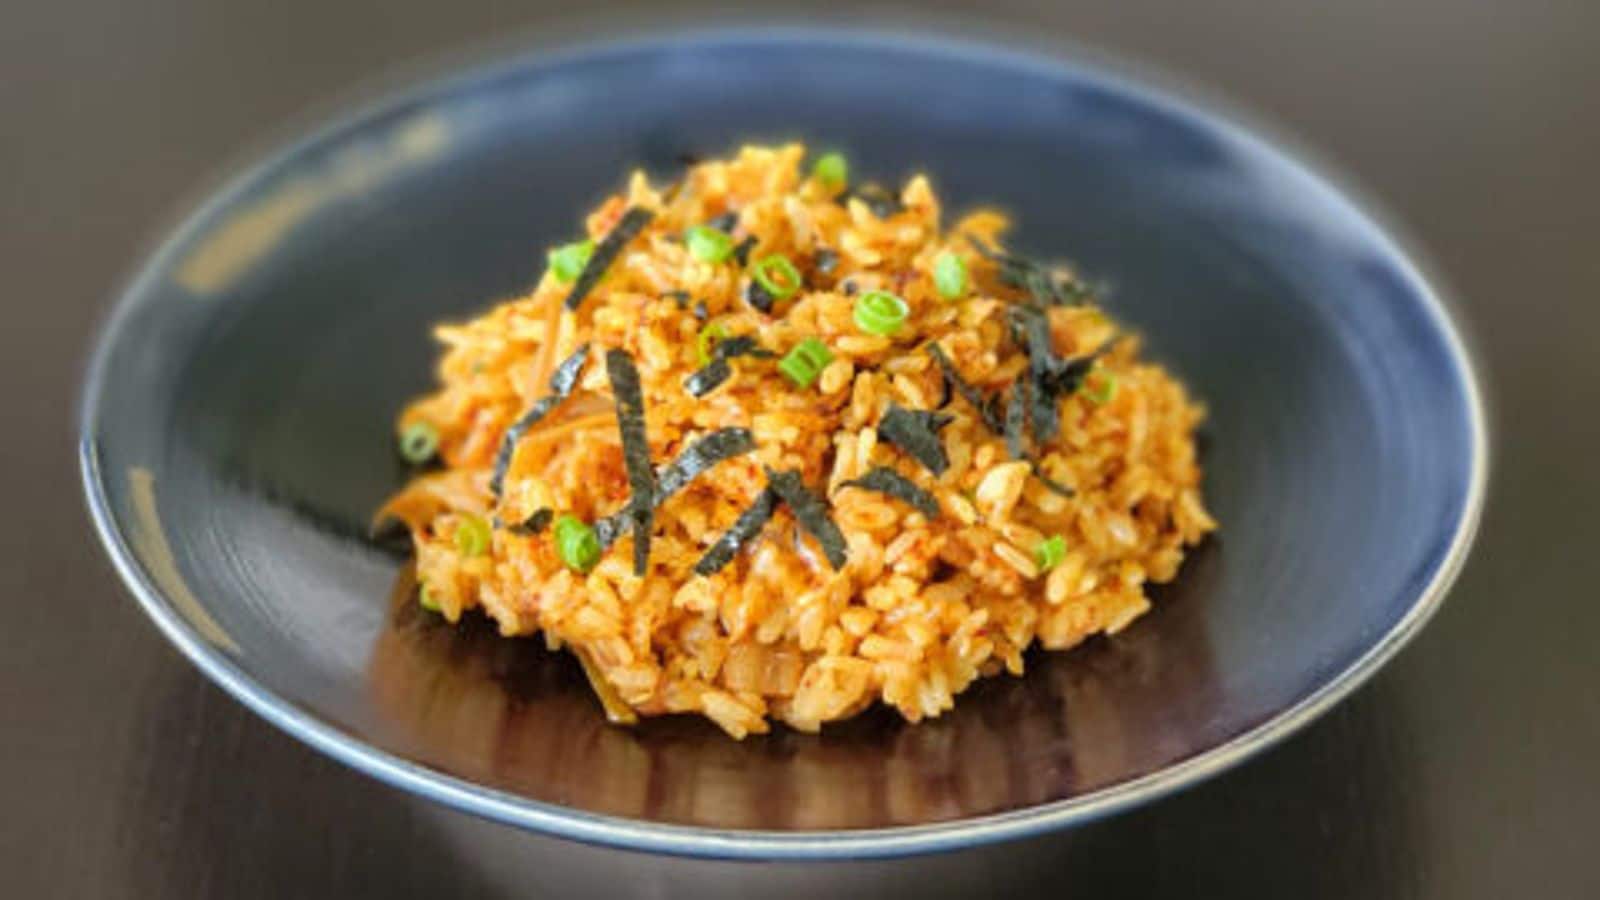 Your guests will love this vegan kimchi fried rice